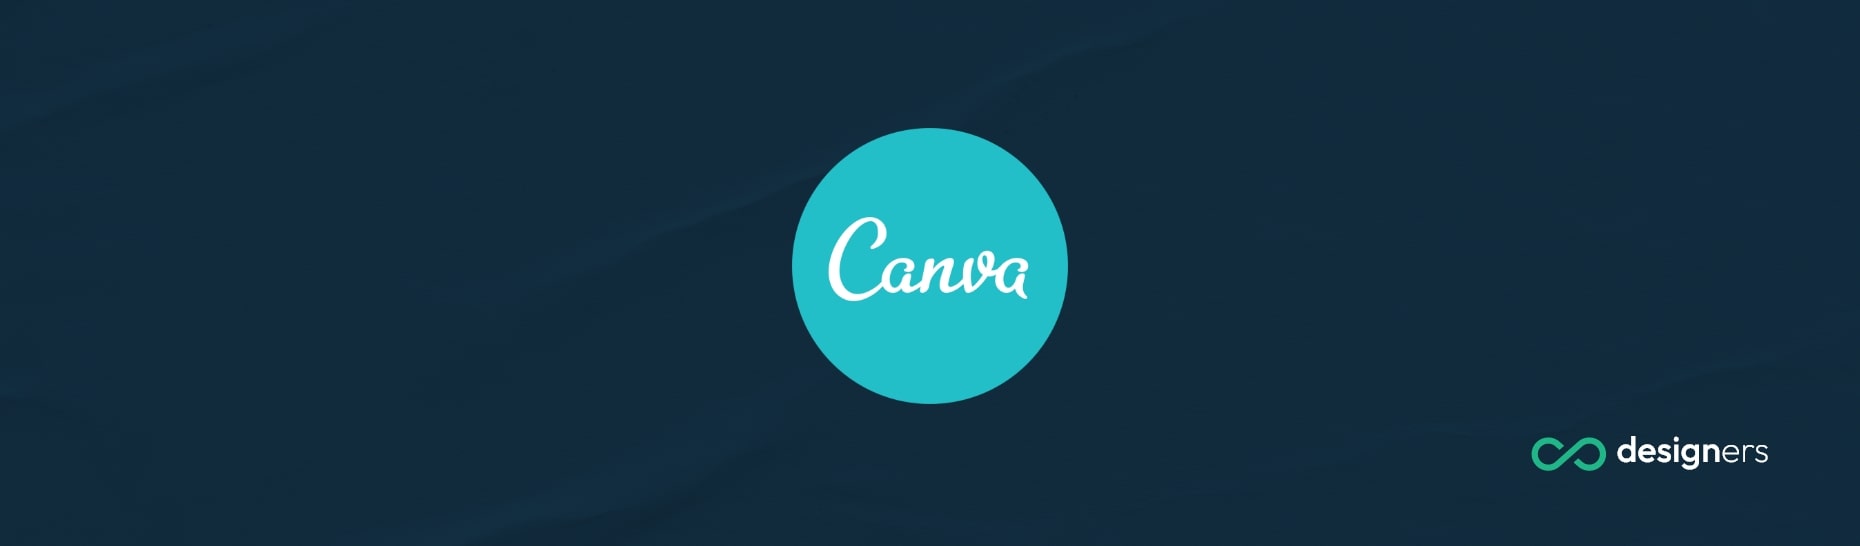 How Do I Stretch an Image in Canva? 